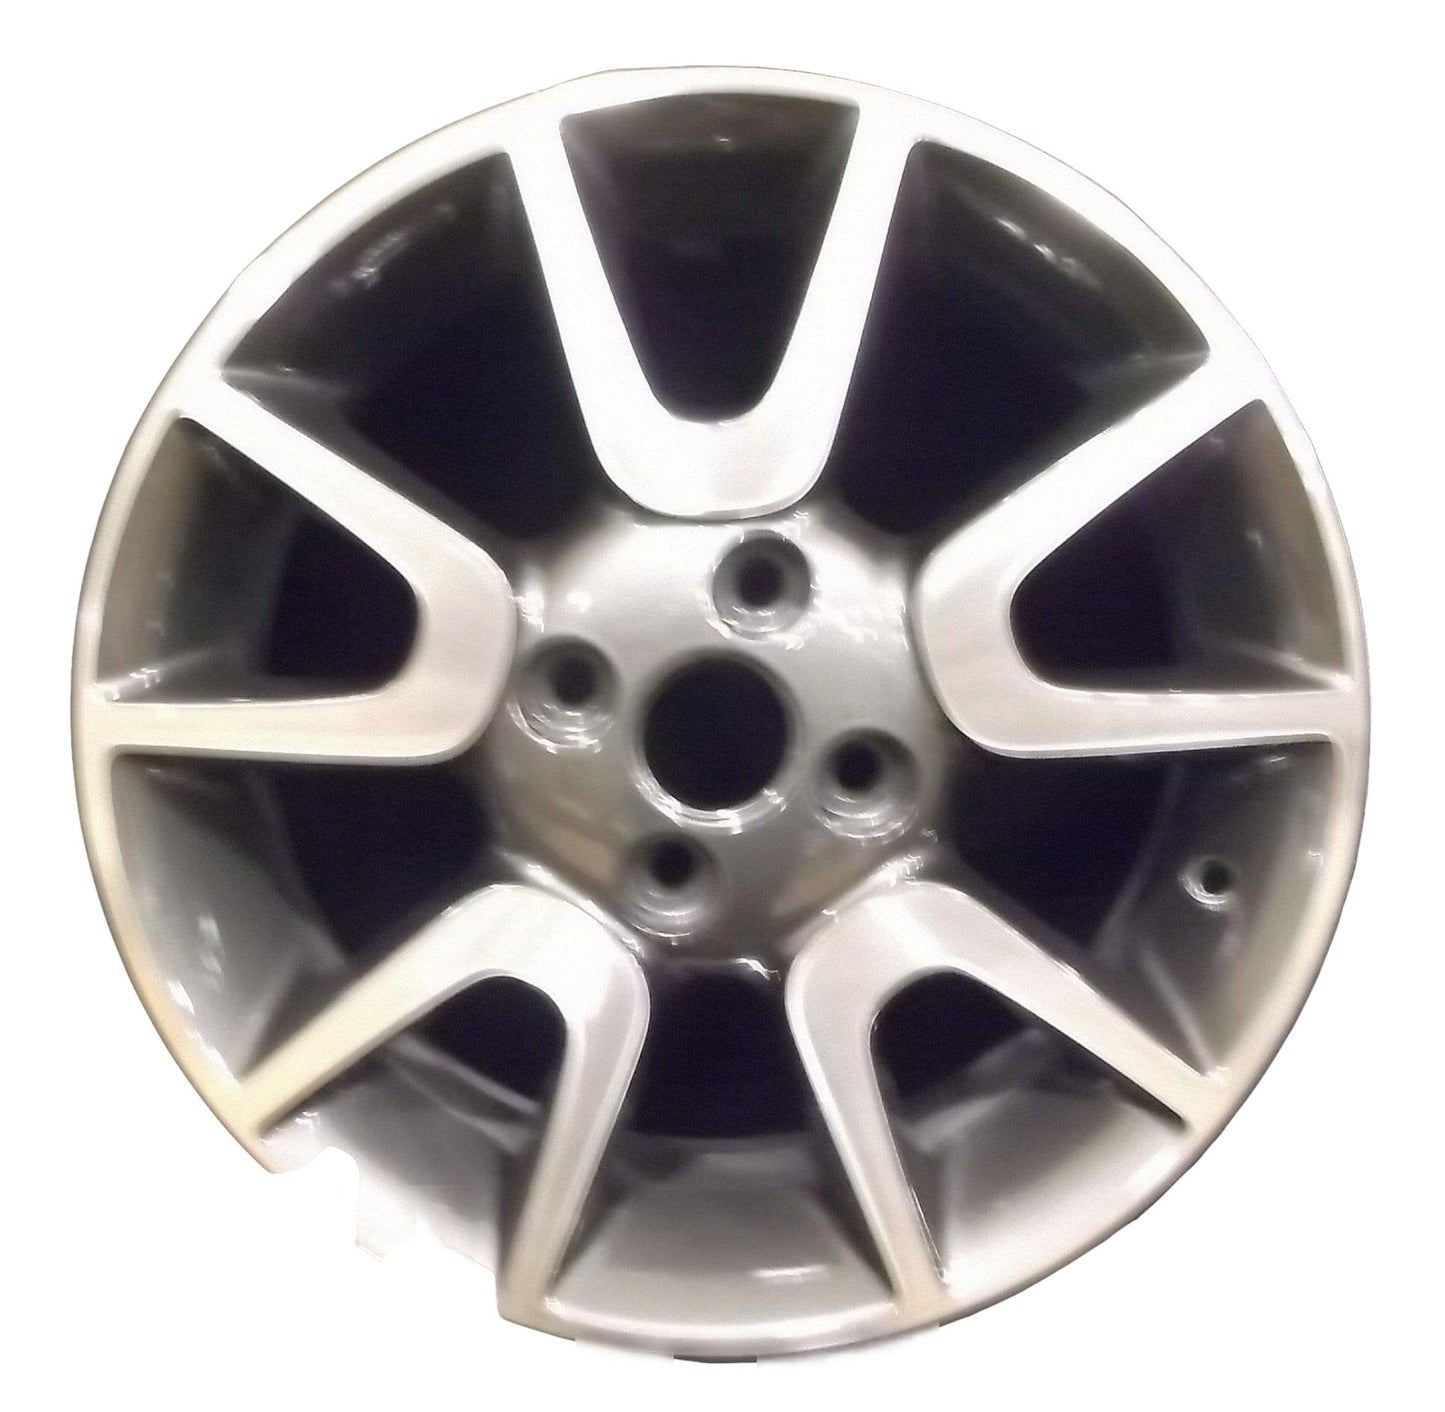 Chevrolet Spark  2013, 2014, 2015 Factory OEM Car Wheel Size 15x6 Alloy WAO.5557.LC54.MA